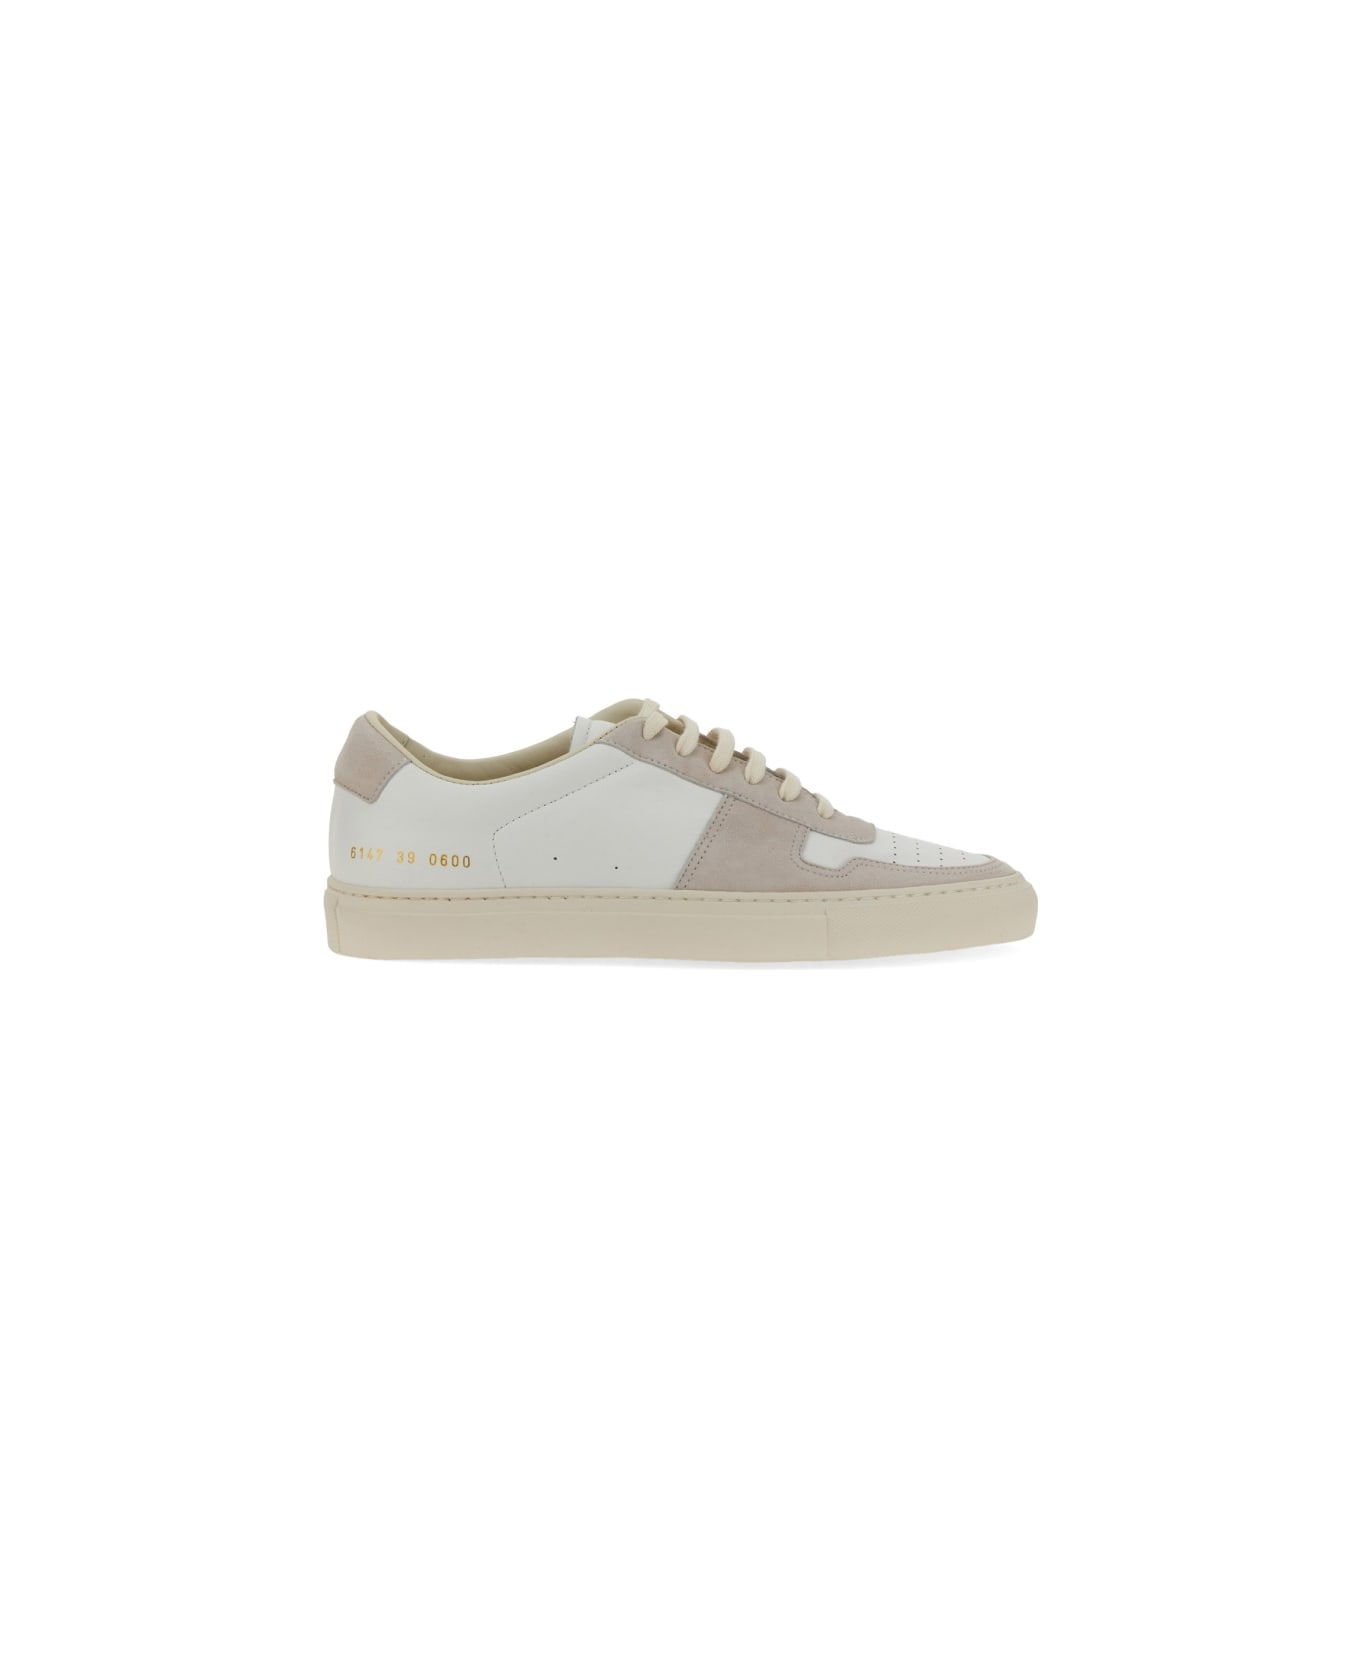 Common Projects "bball" Sneaker - NUDE スニーカー